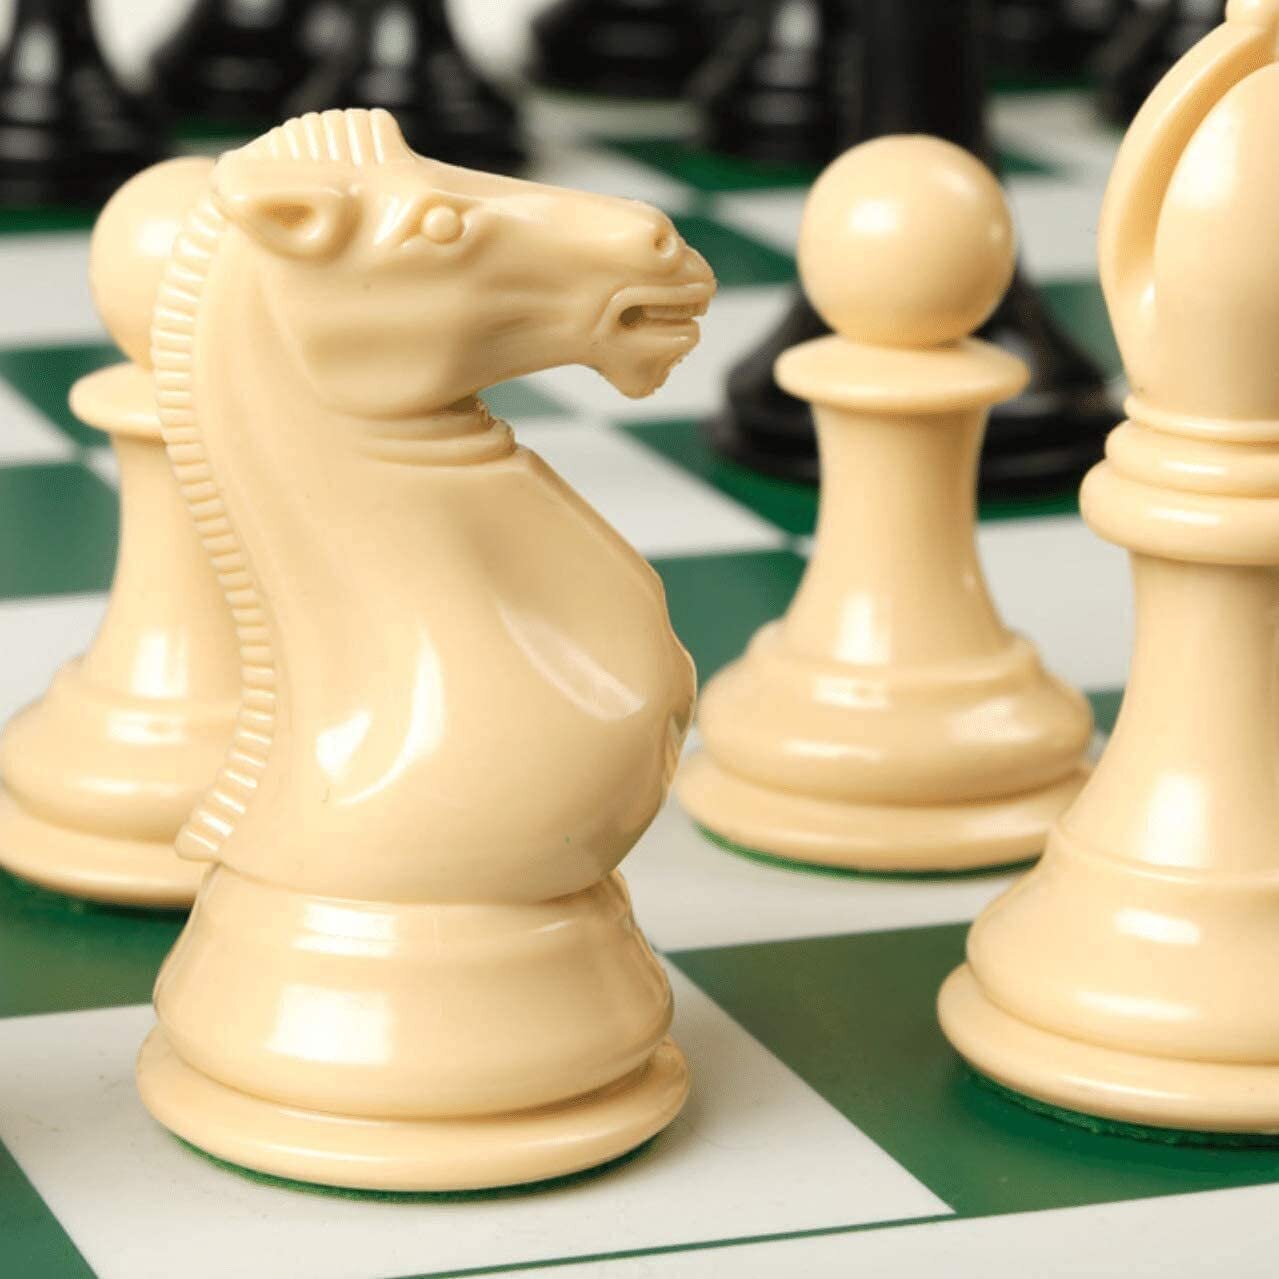 Chess: An easy-to-follow illustrated guide to playing this by